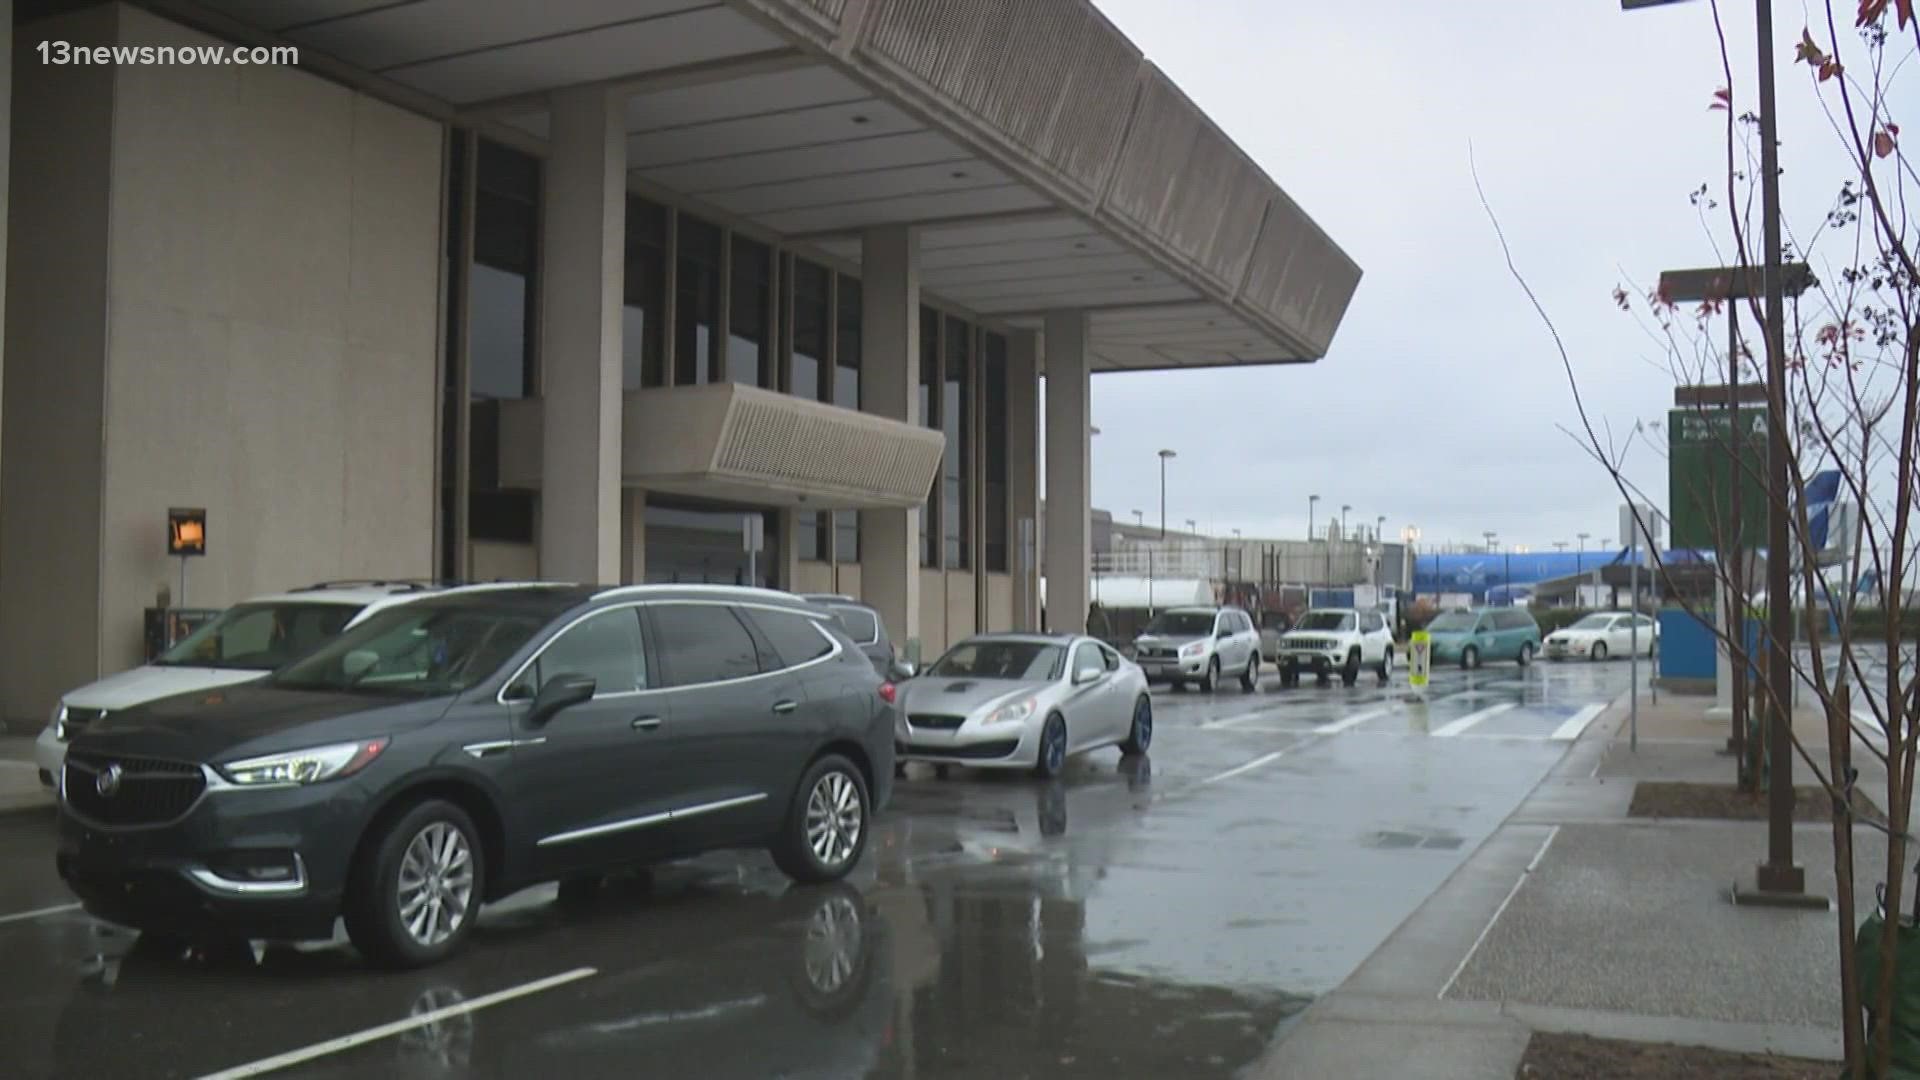 Travel numbers could reach pre-pandemic numbers at Norfolk International.